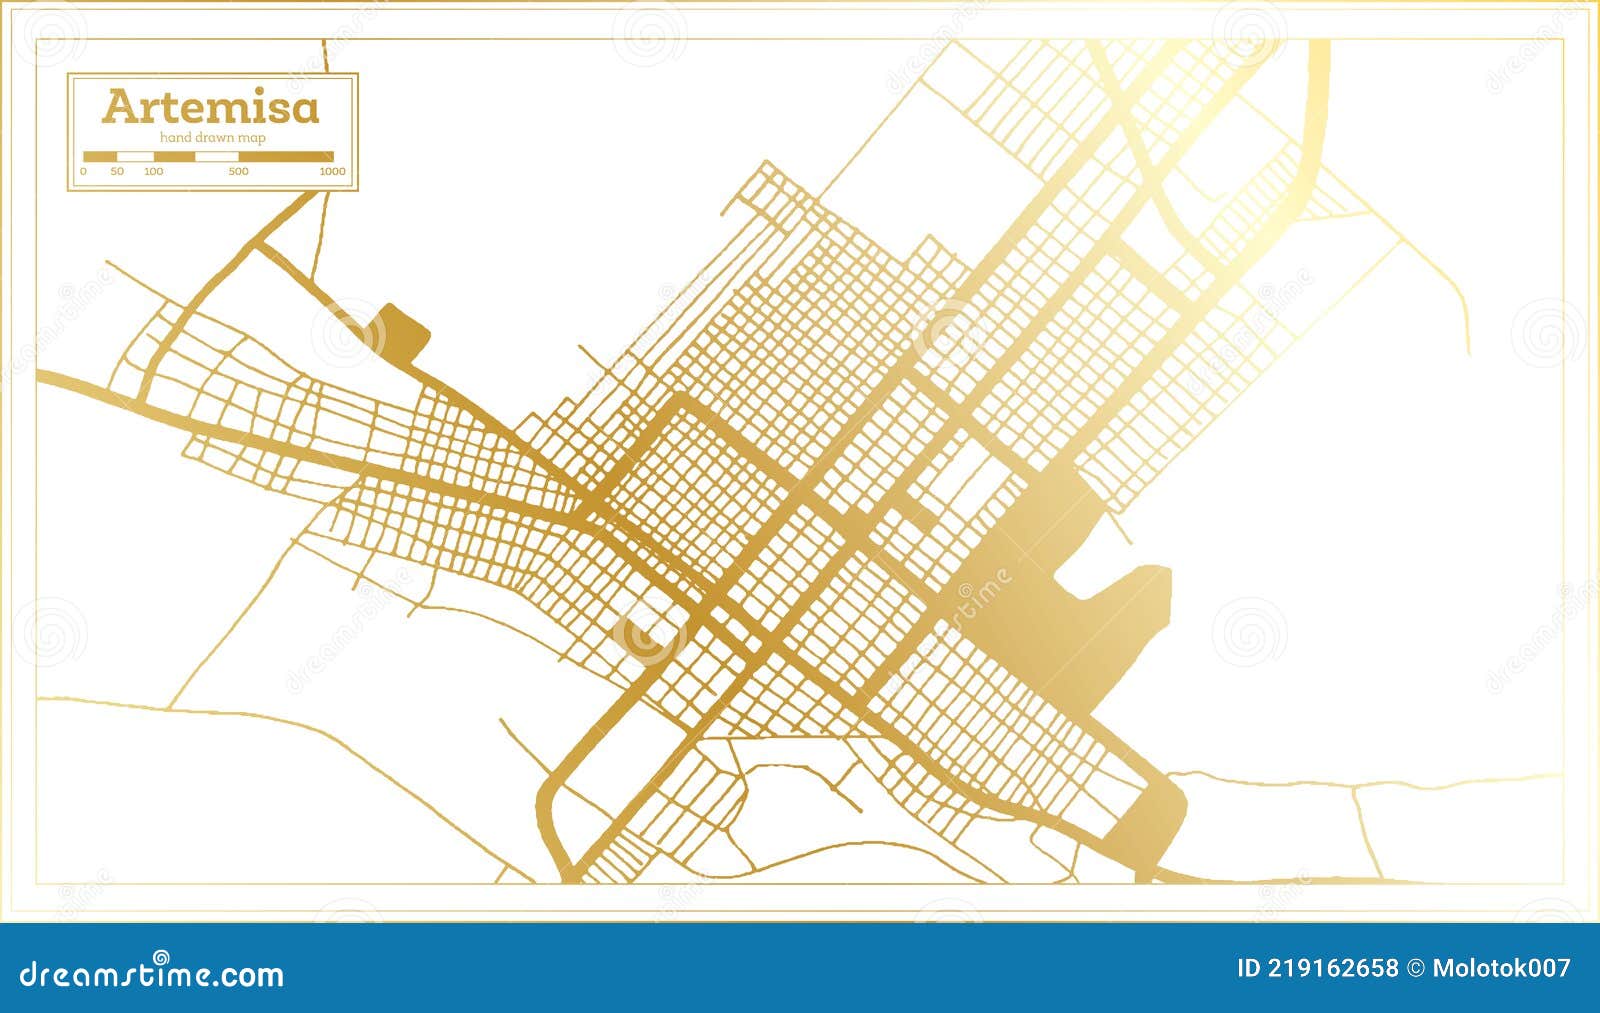 artemisa cuba city map in retro style in golden color. outline map